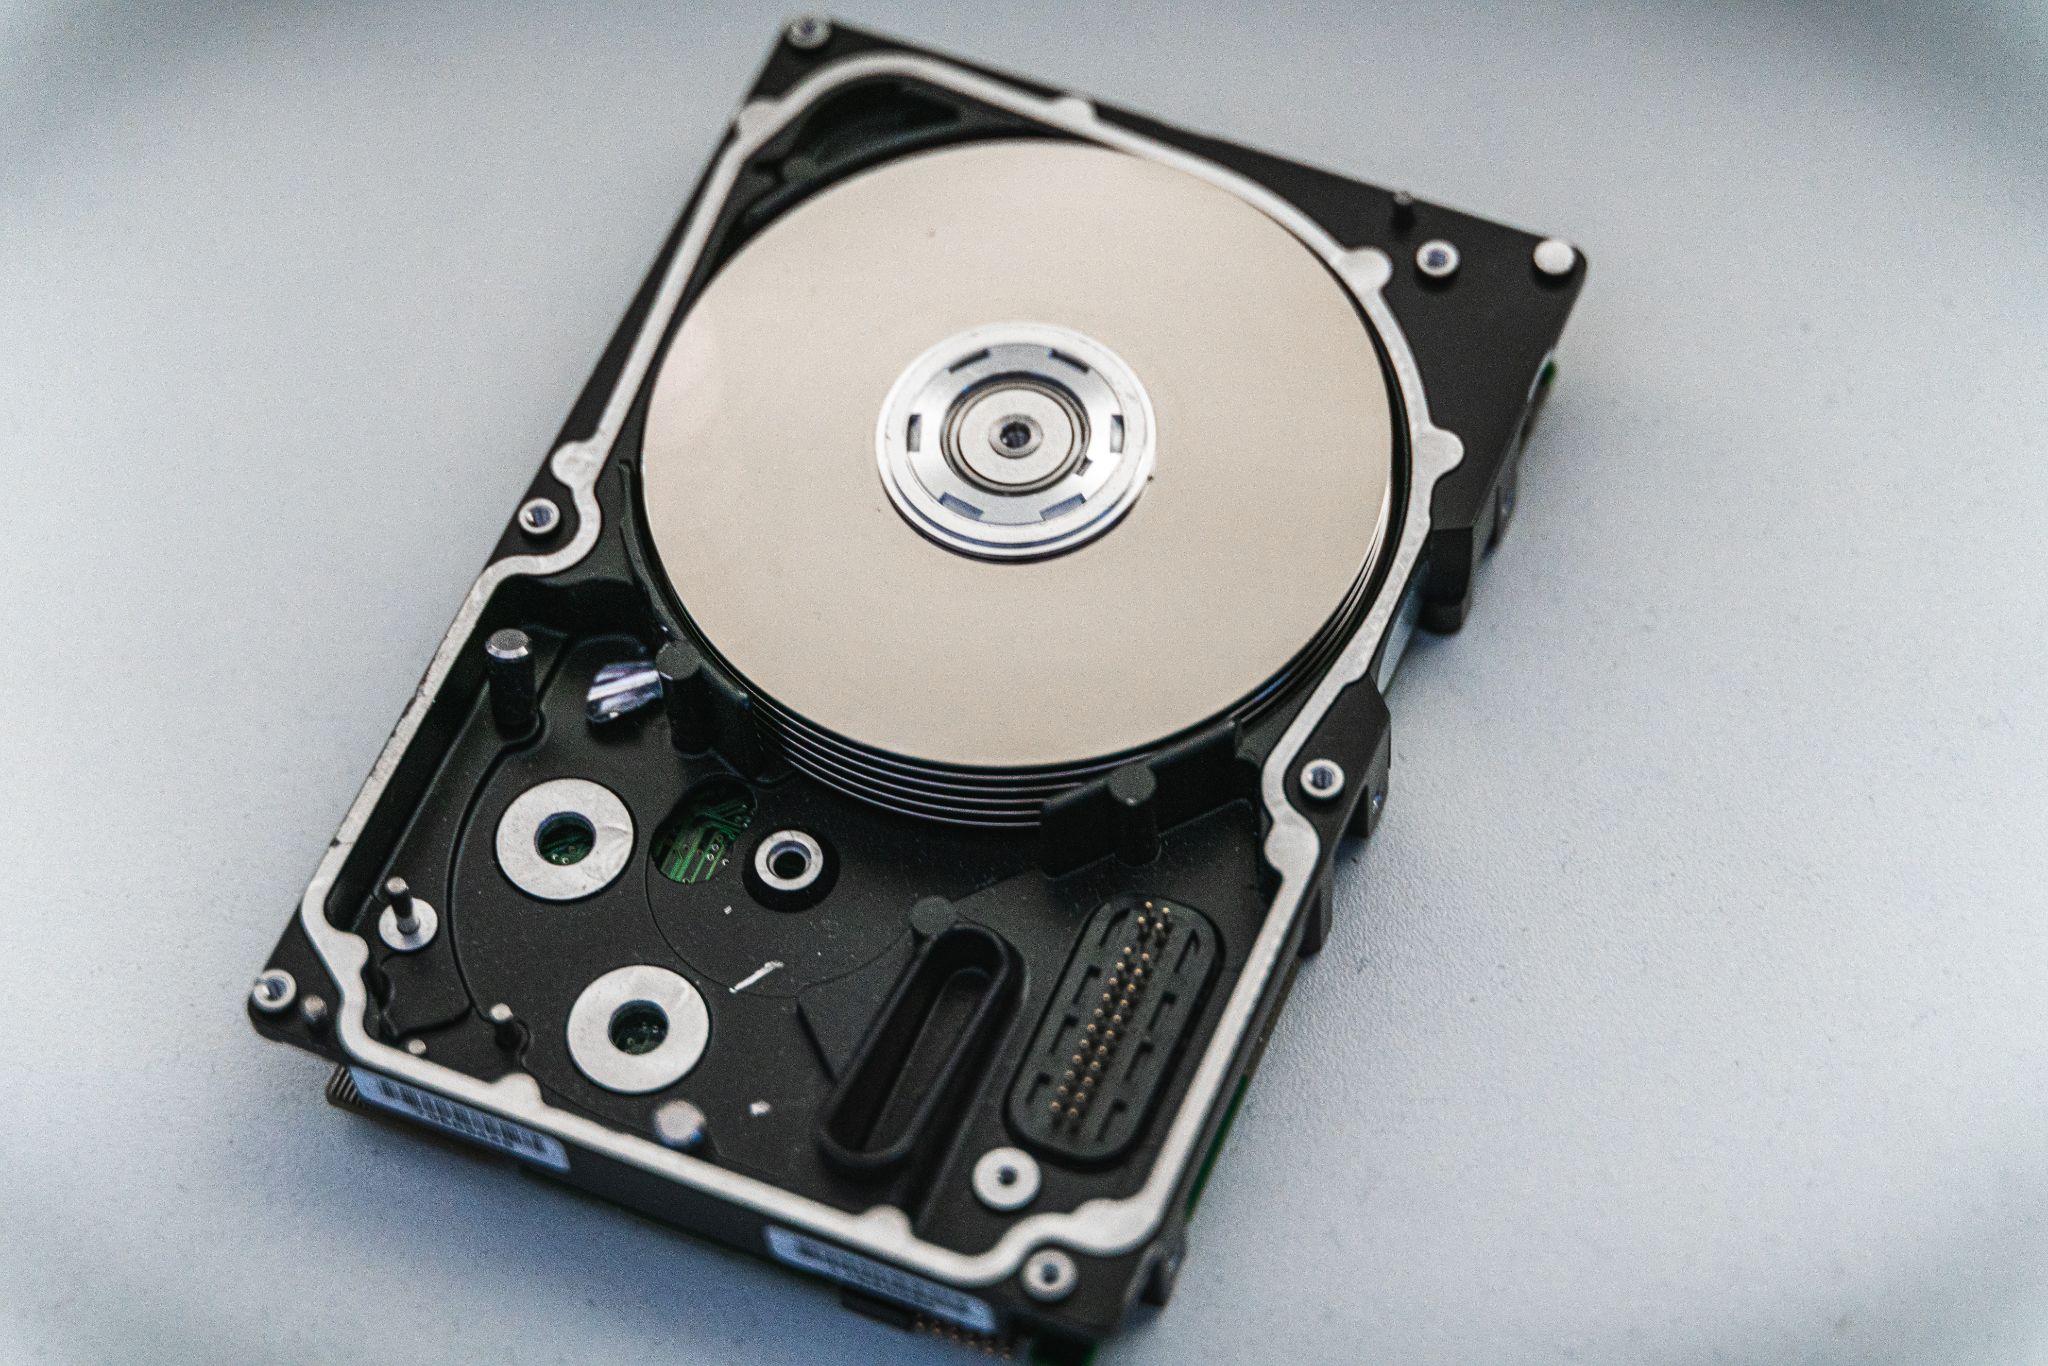 An image of a hard disk